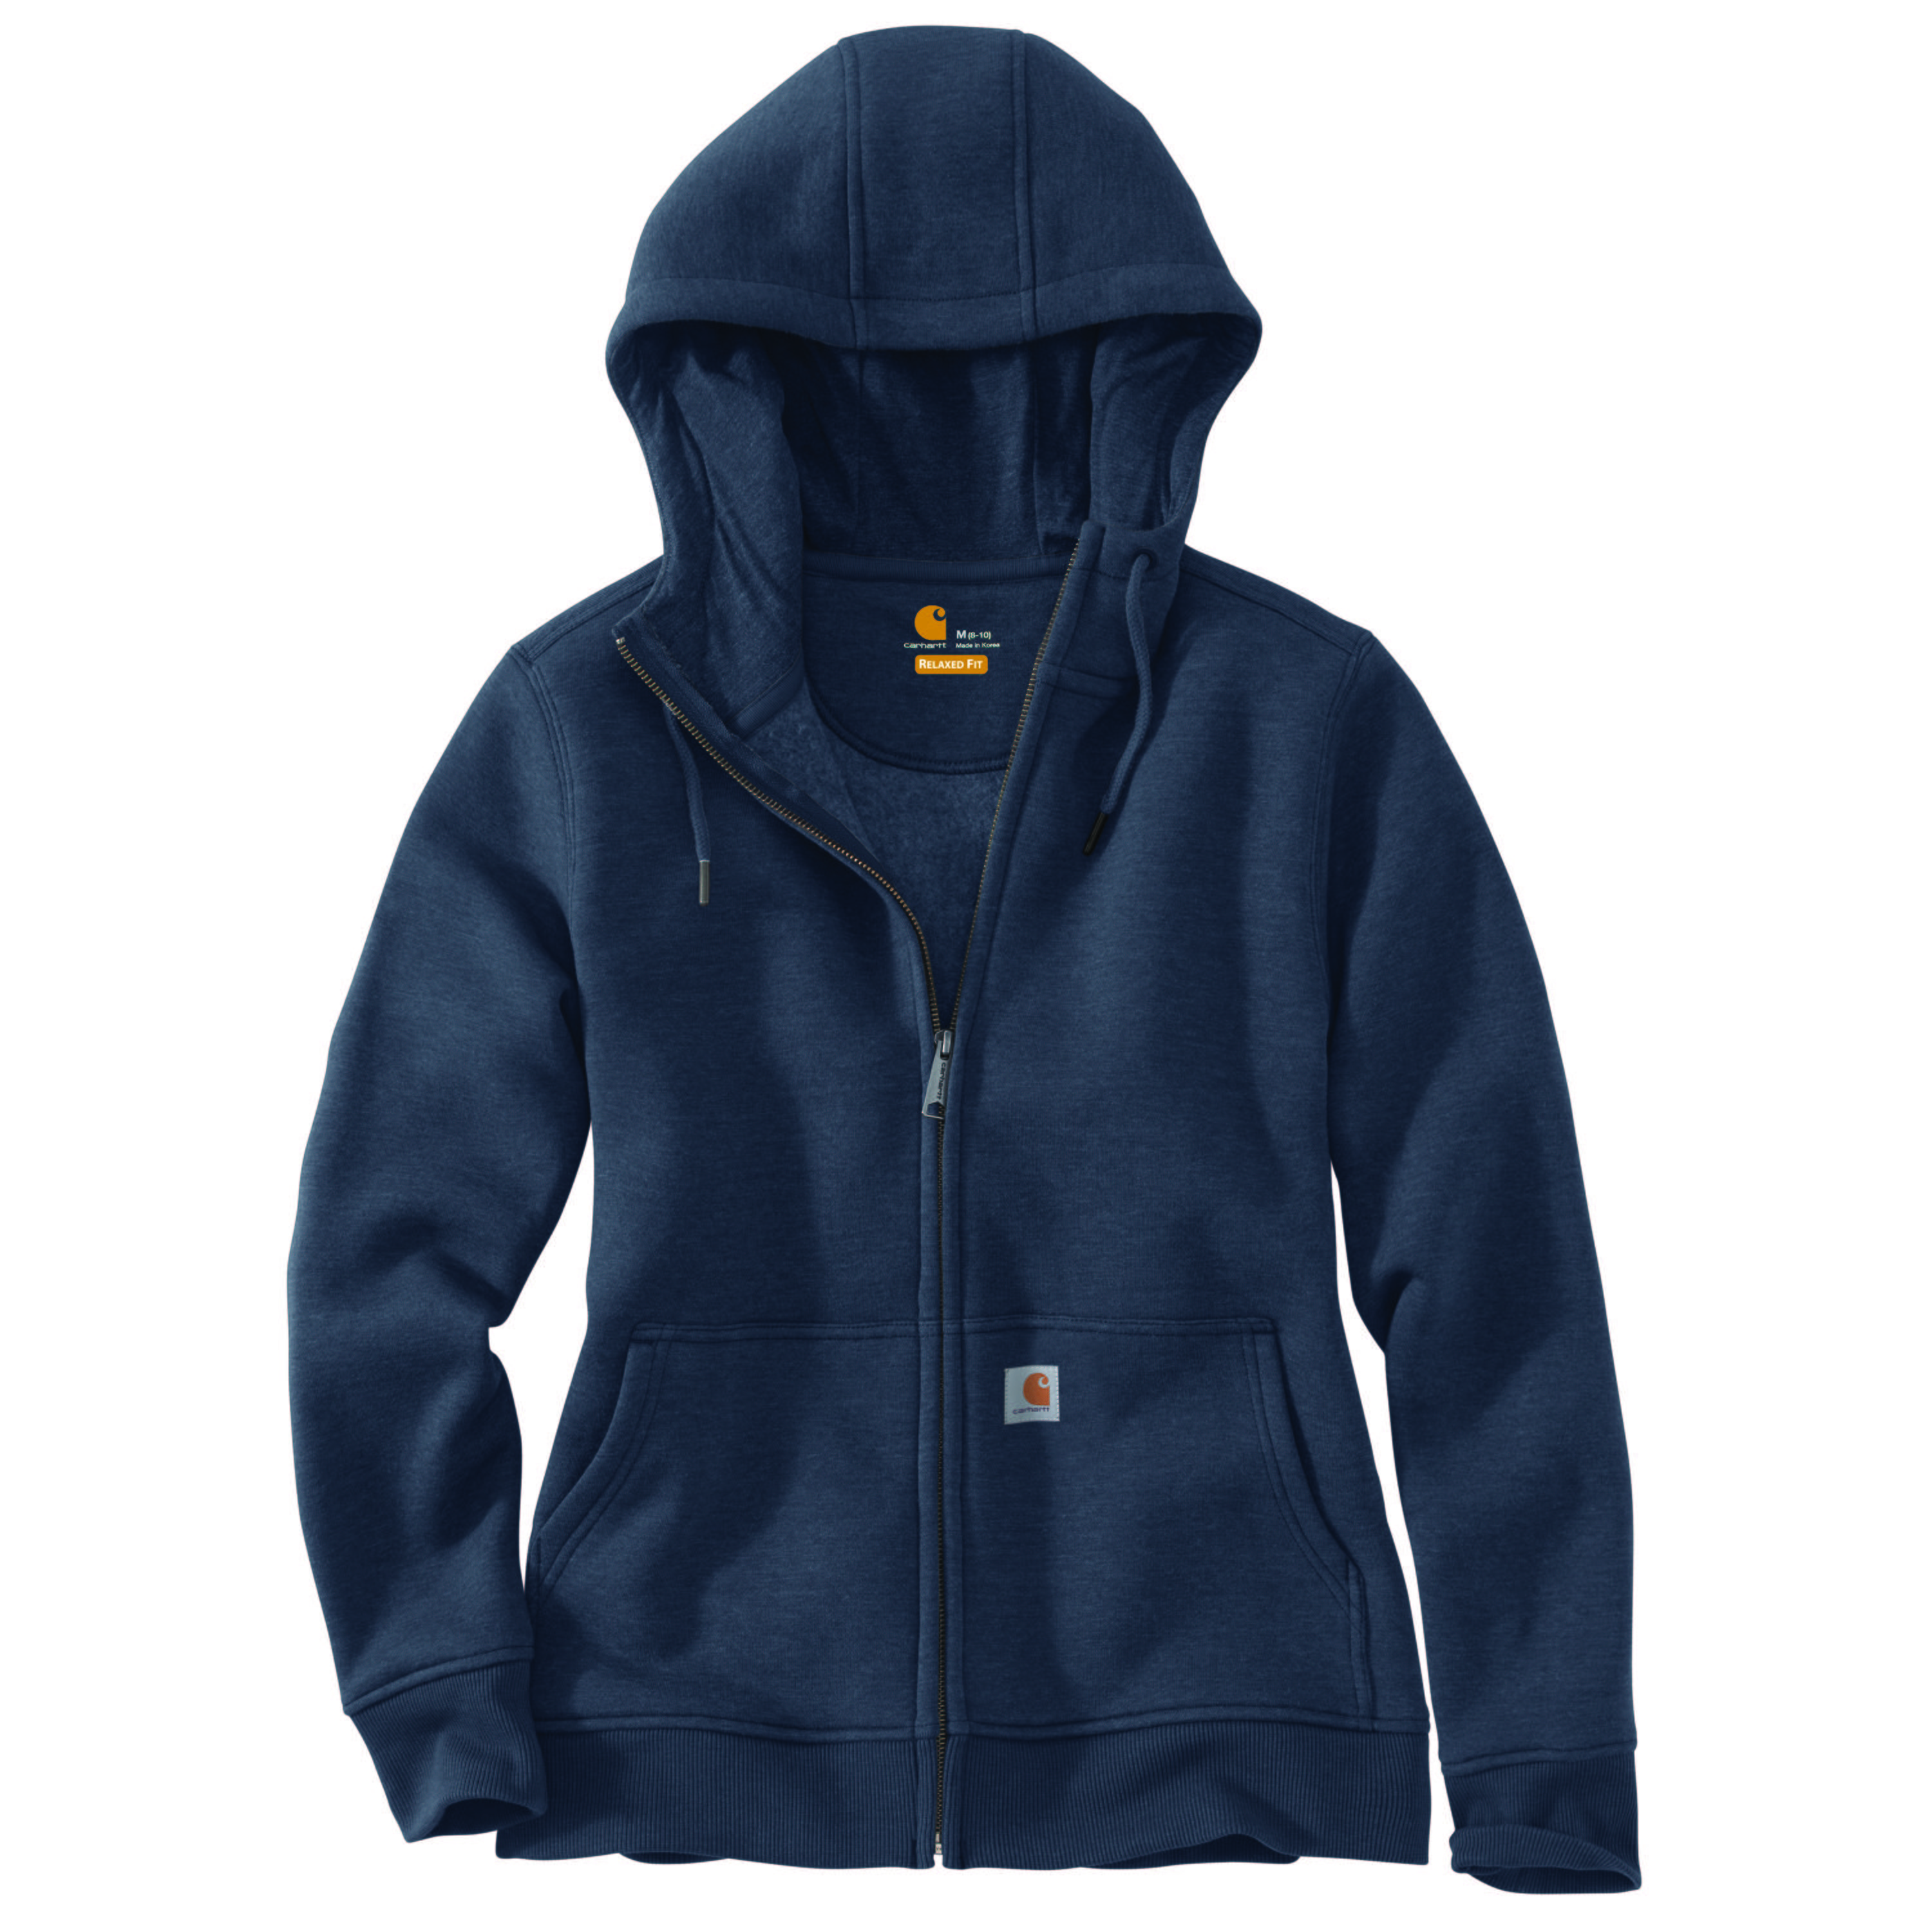 Women's Hoodies and Jackets